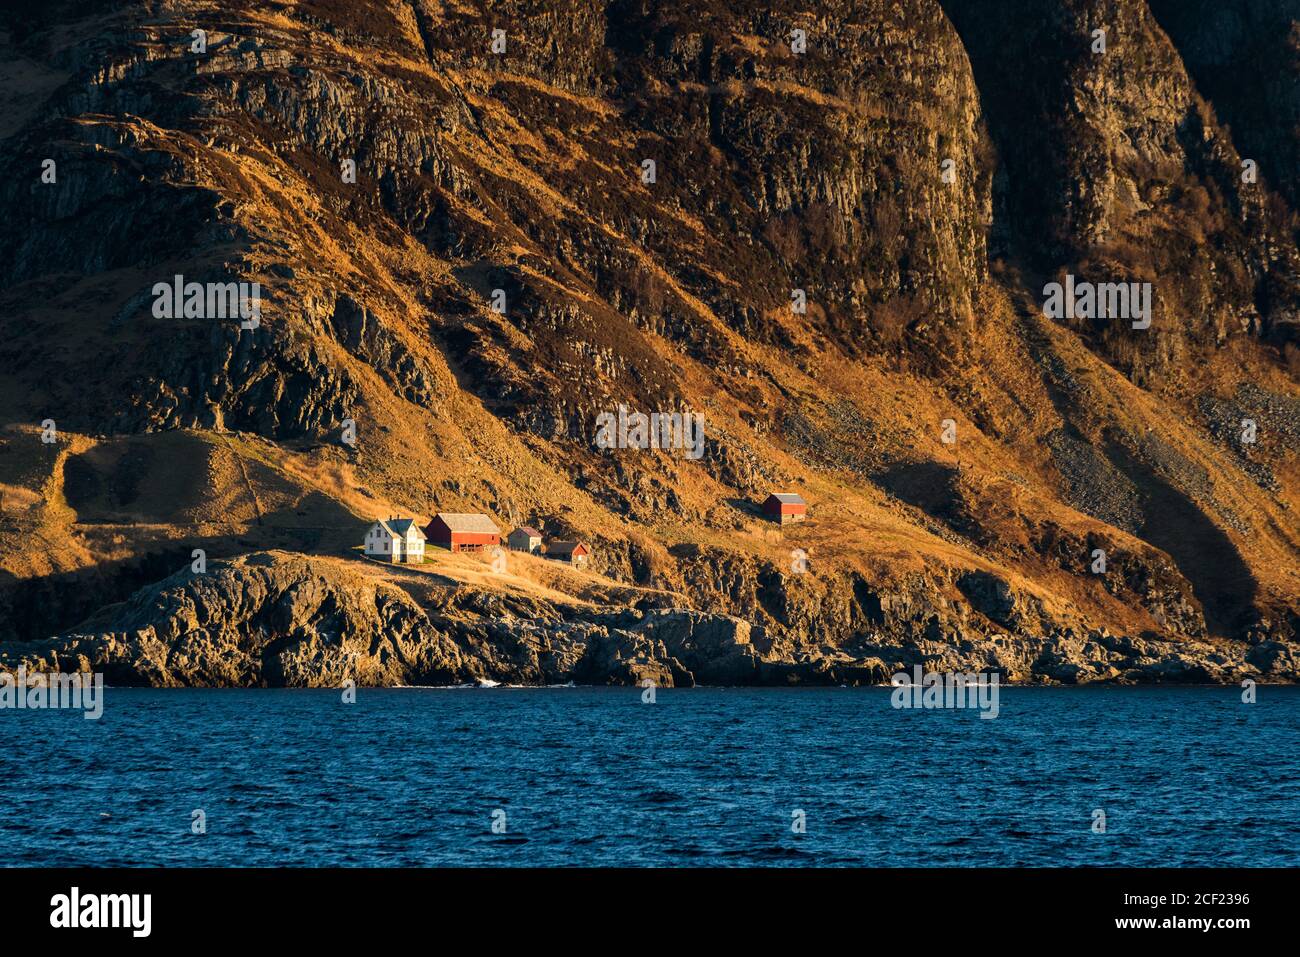 Steep cliff on the coast with small houses in barren landscape in Norway on bright sunny day seen from boat Stock Photo